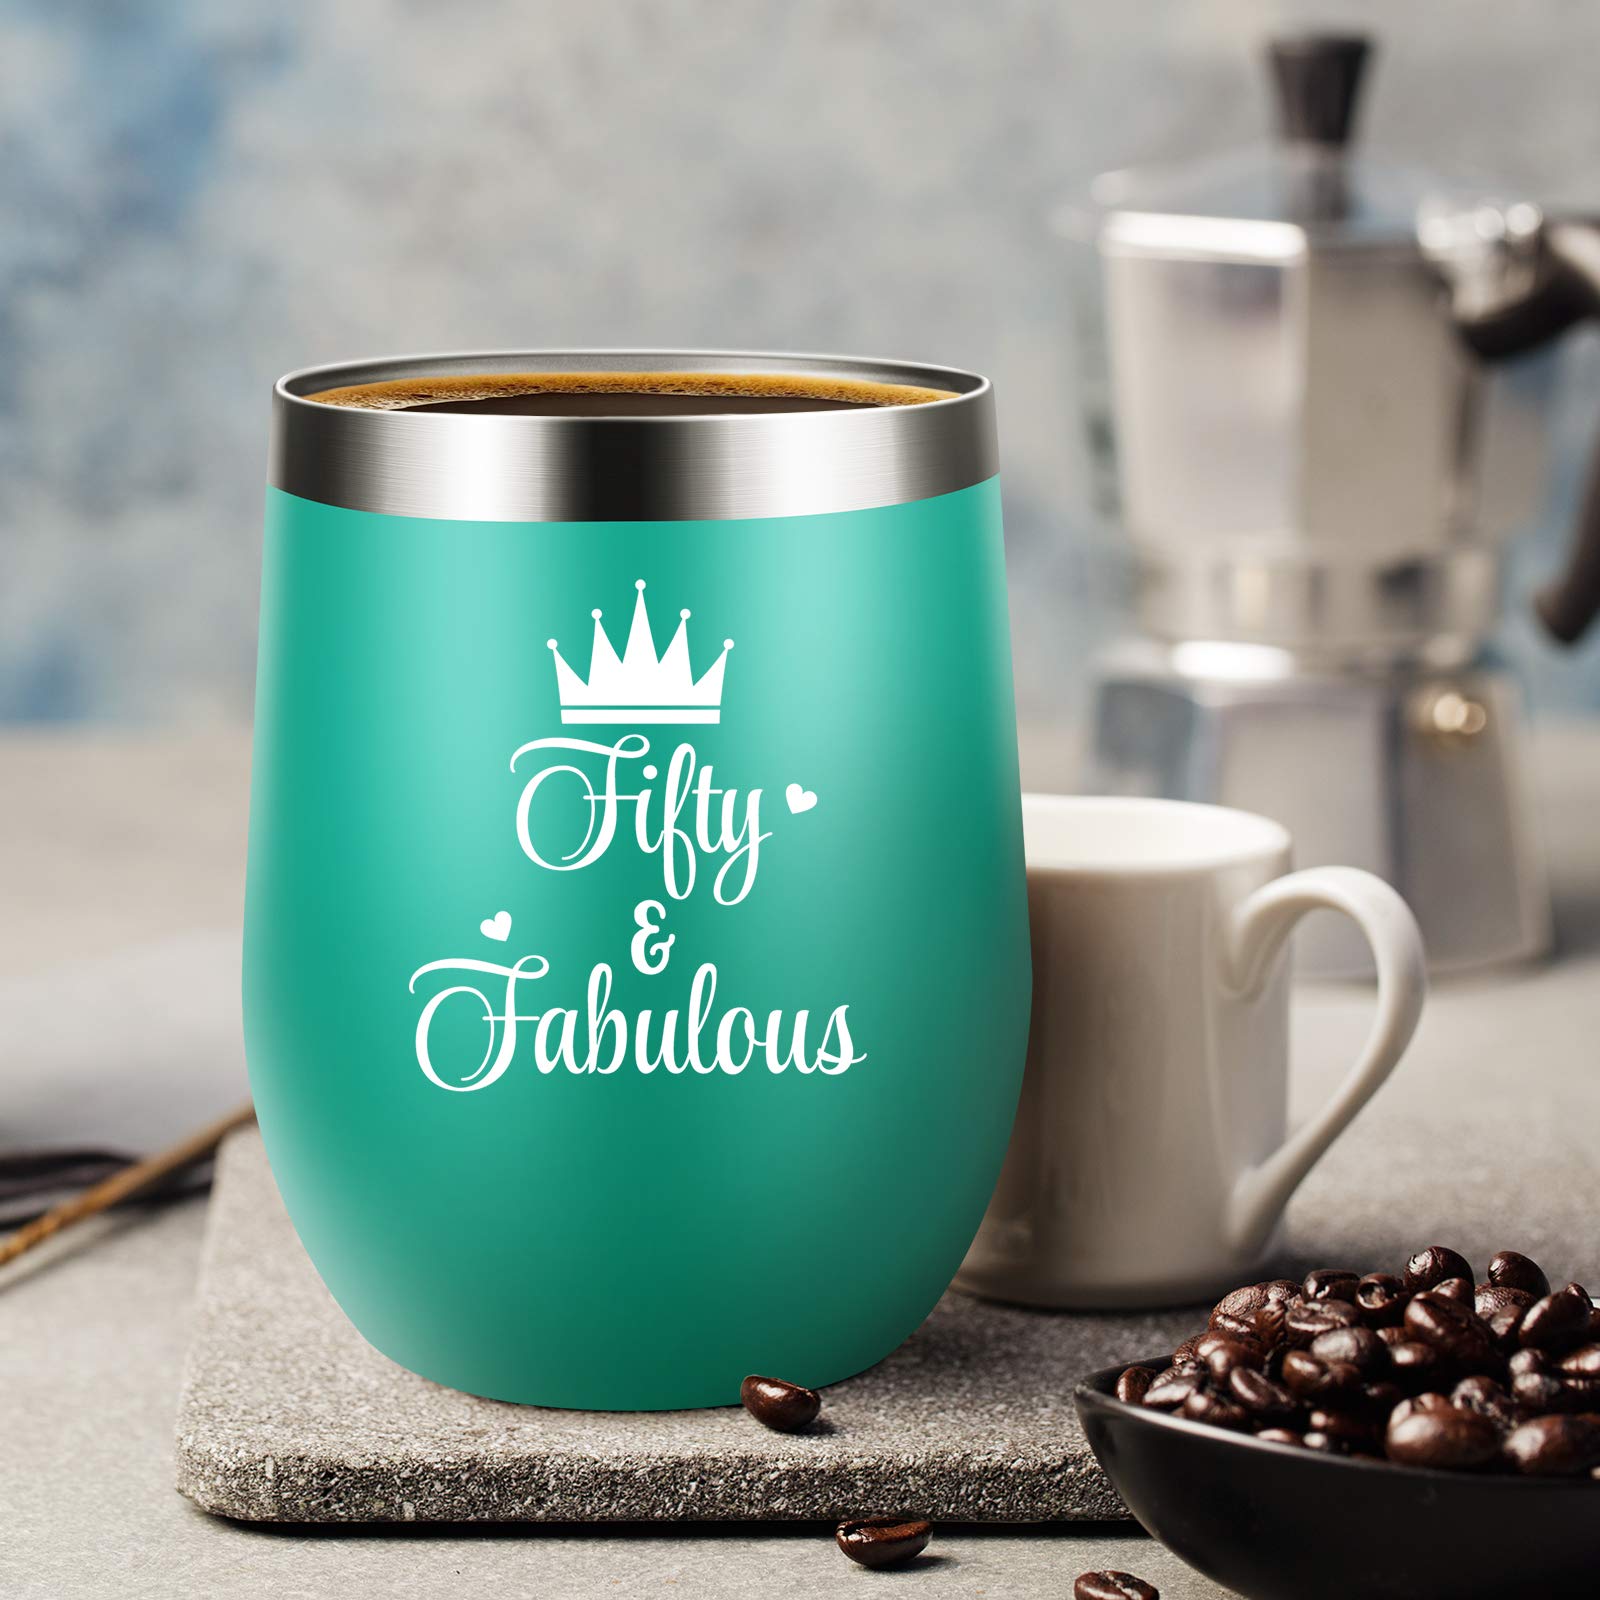 50th Birthday Gifts For Women - 1973 50th Birthday Decorations For Women - Birthday Gifts For 50 Year Old Woman - Green 60 & Fabulous 12 oz Wine Tumbler Gift for Her, Wife, Mom, Sister, Friend